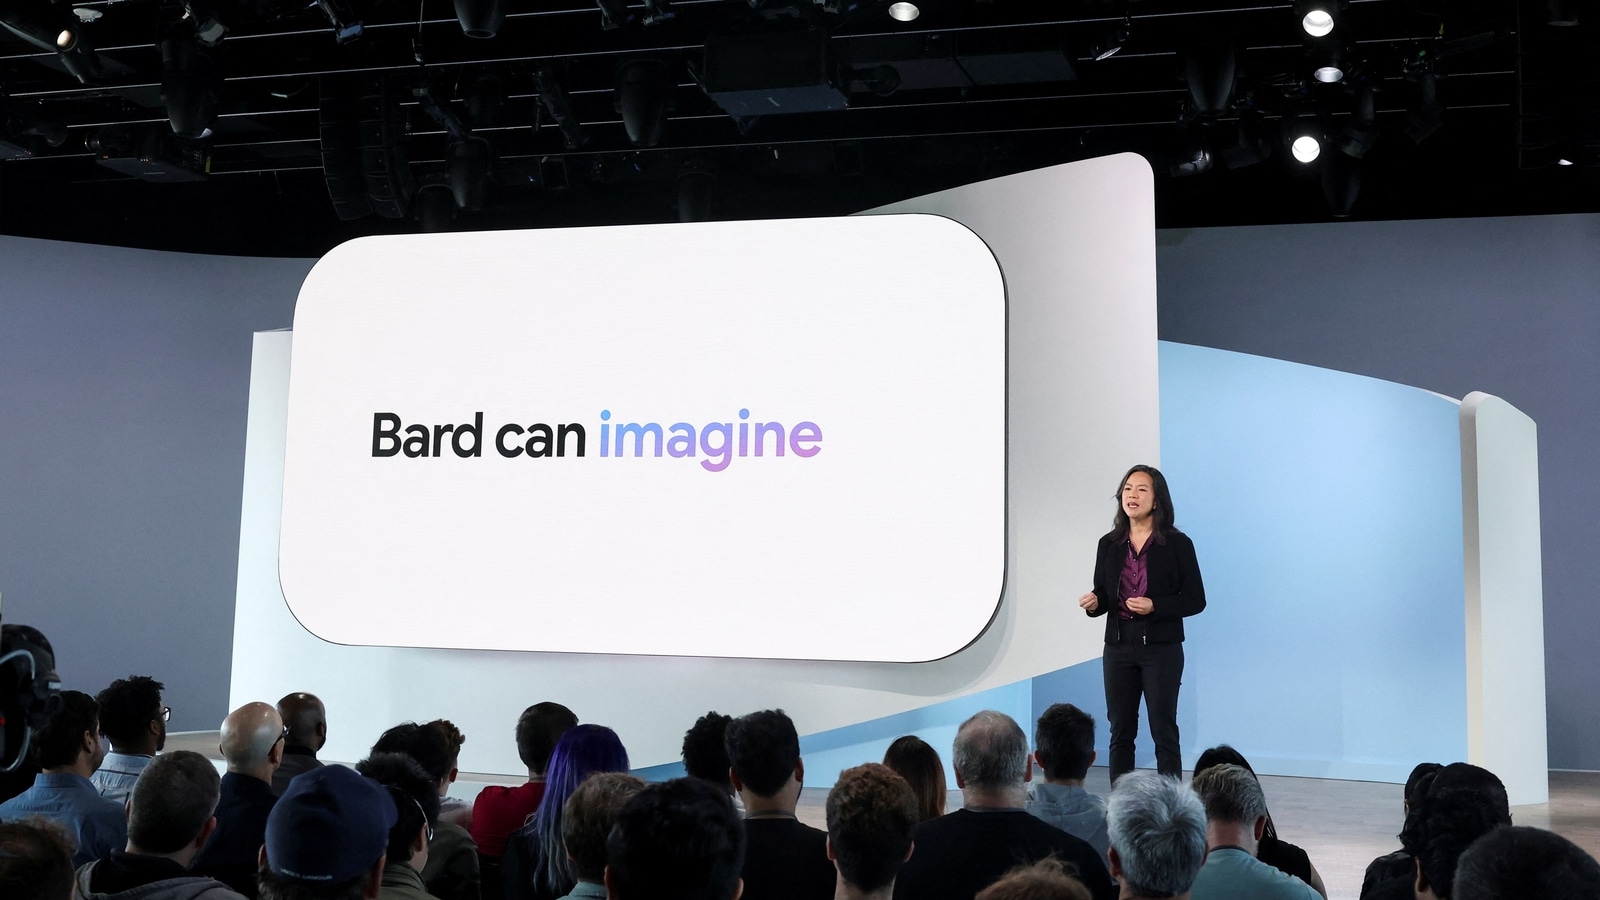 Google’s New Virtual Assistant to Include Bard AI Tools